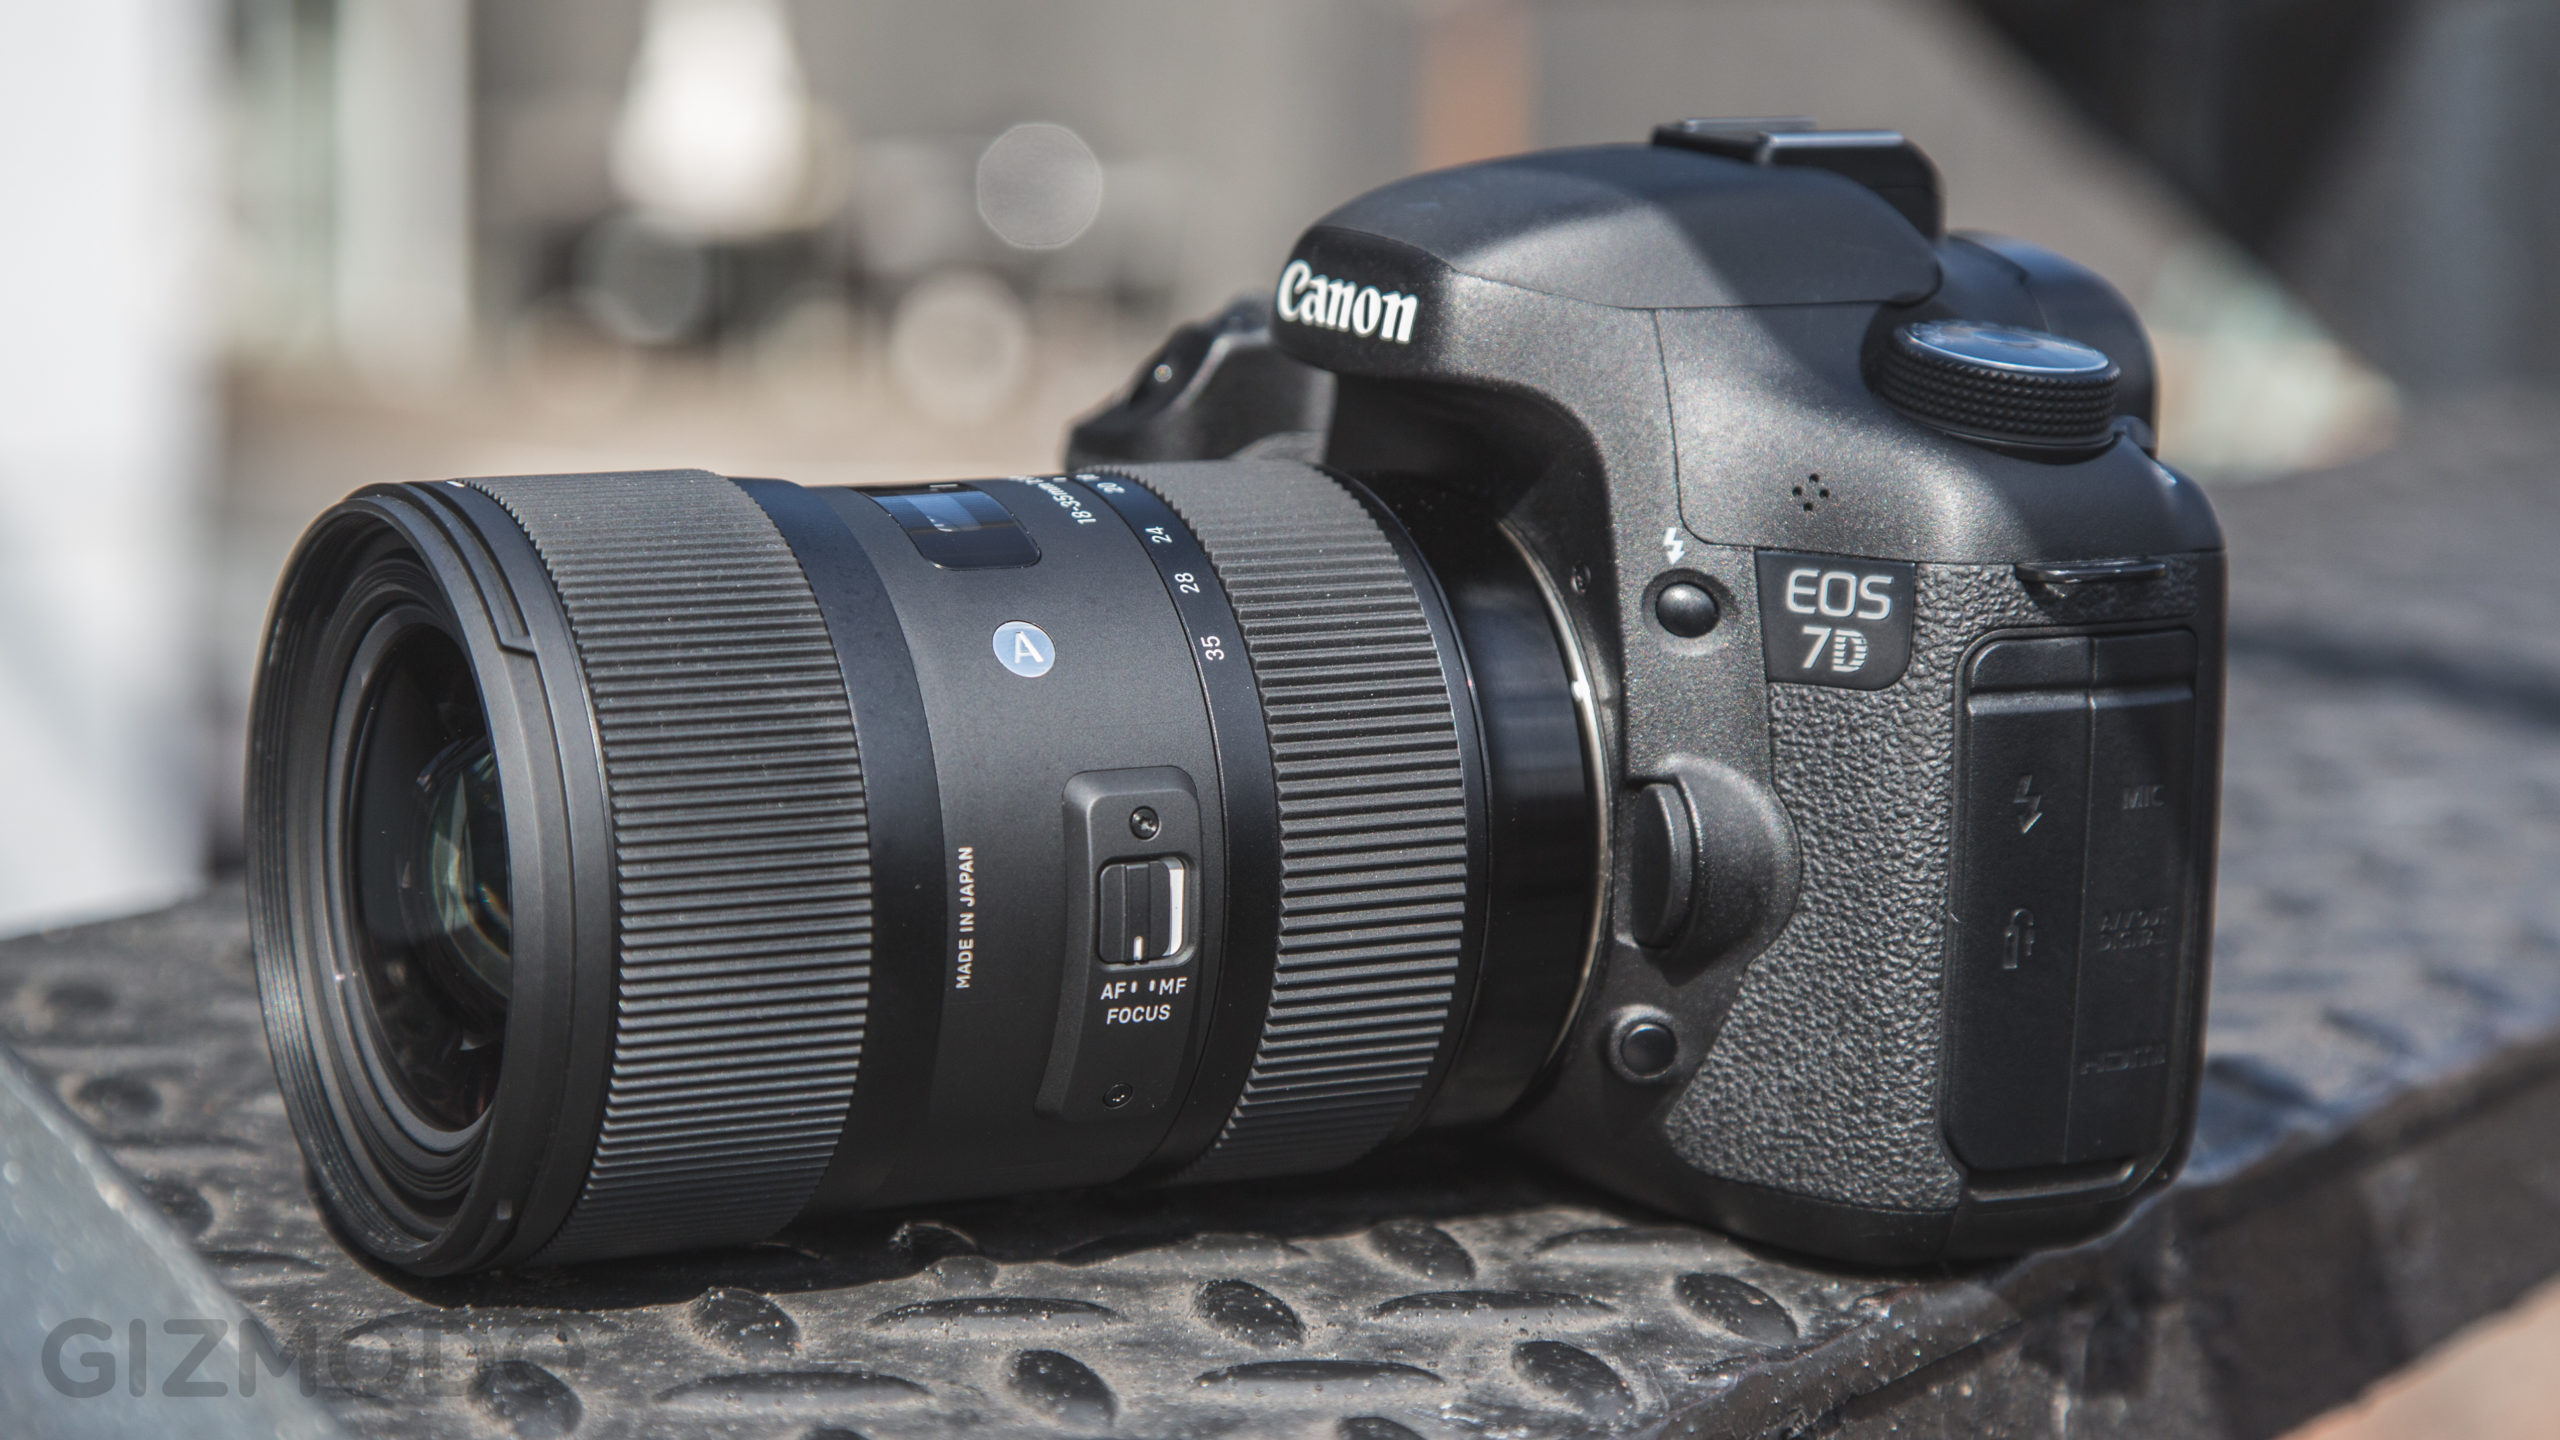 Sigma 18-35mm F/1.8 Review: The Best Low-Light Zoom Lens By A Mile